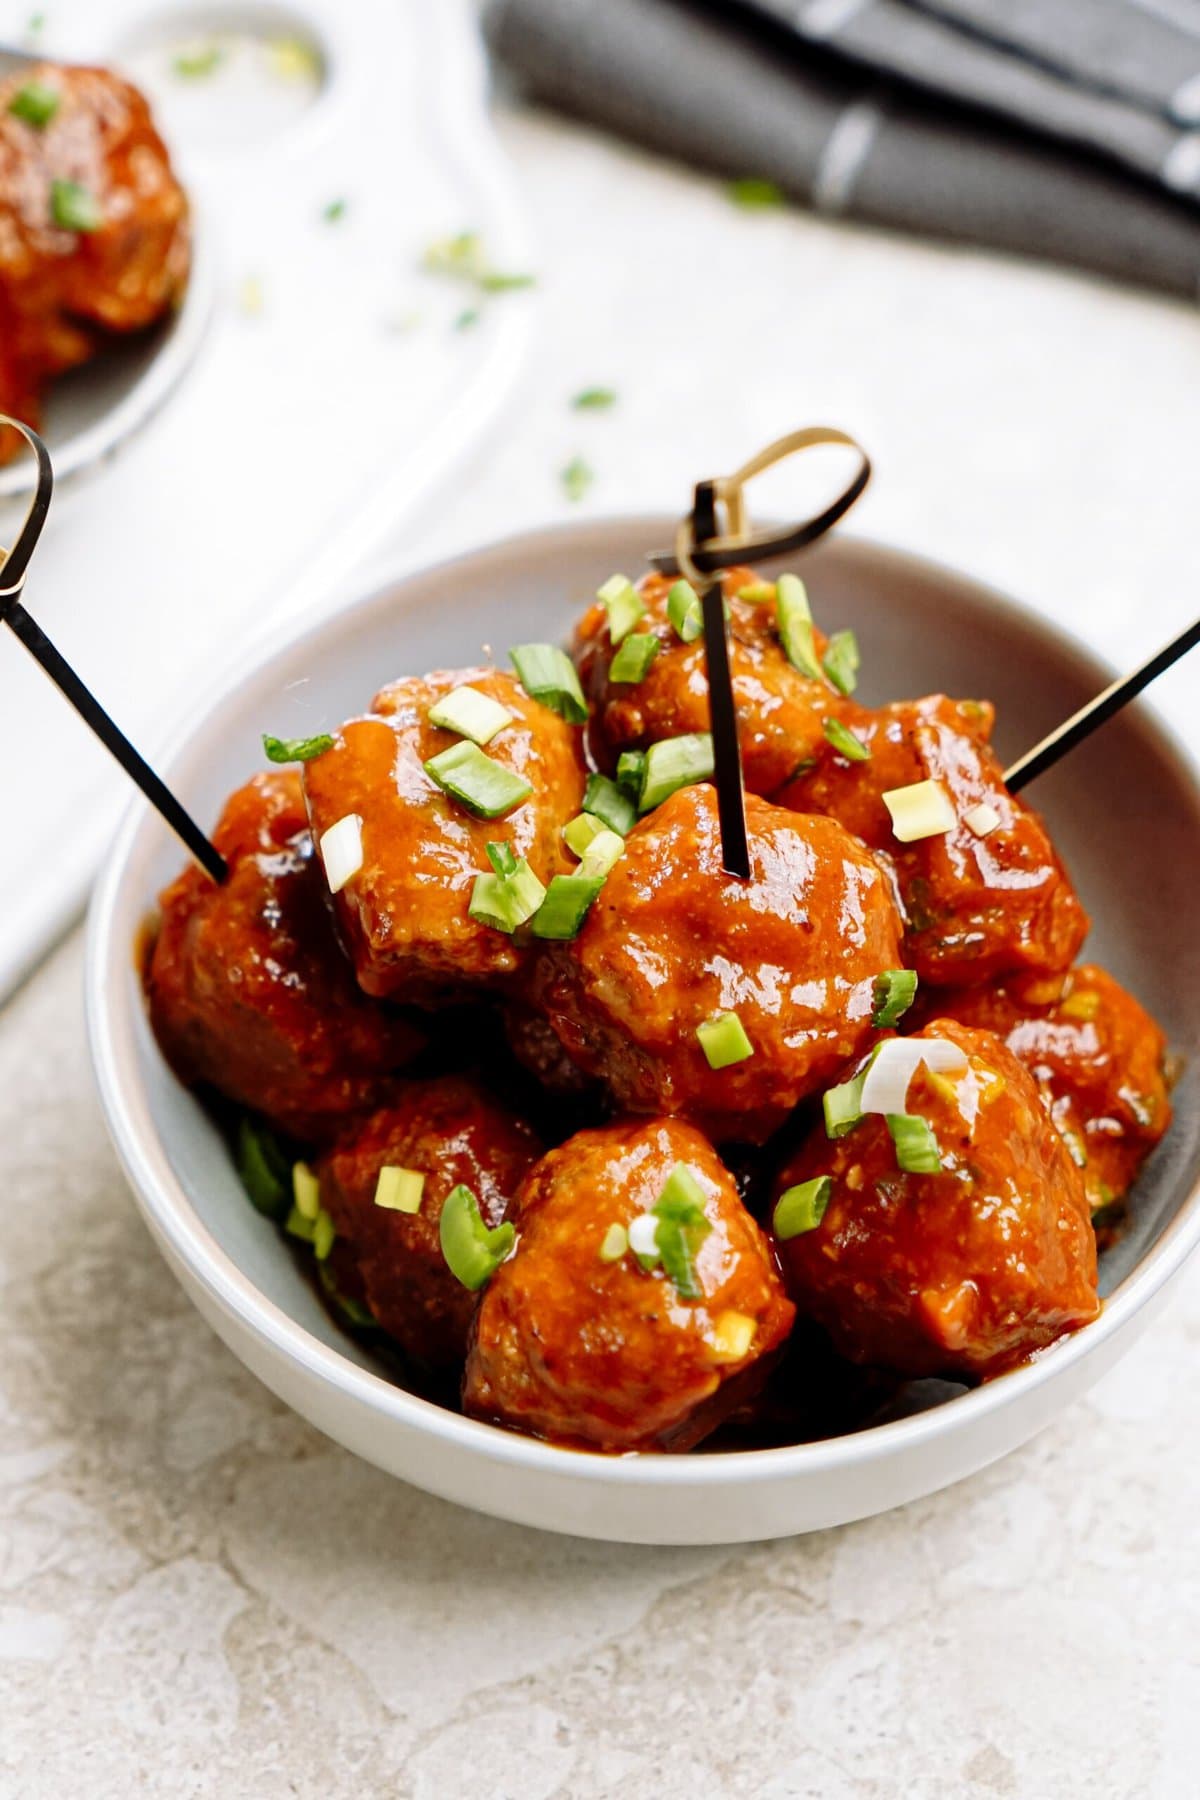 A bowl of glazed meatballs garnished with green onions, served with toothpick skewers.